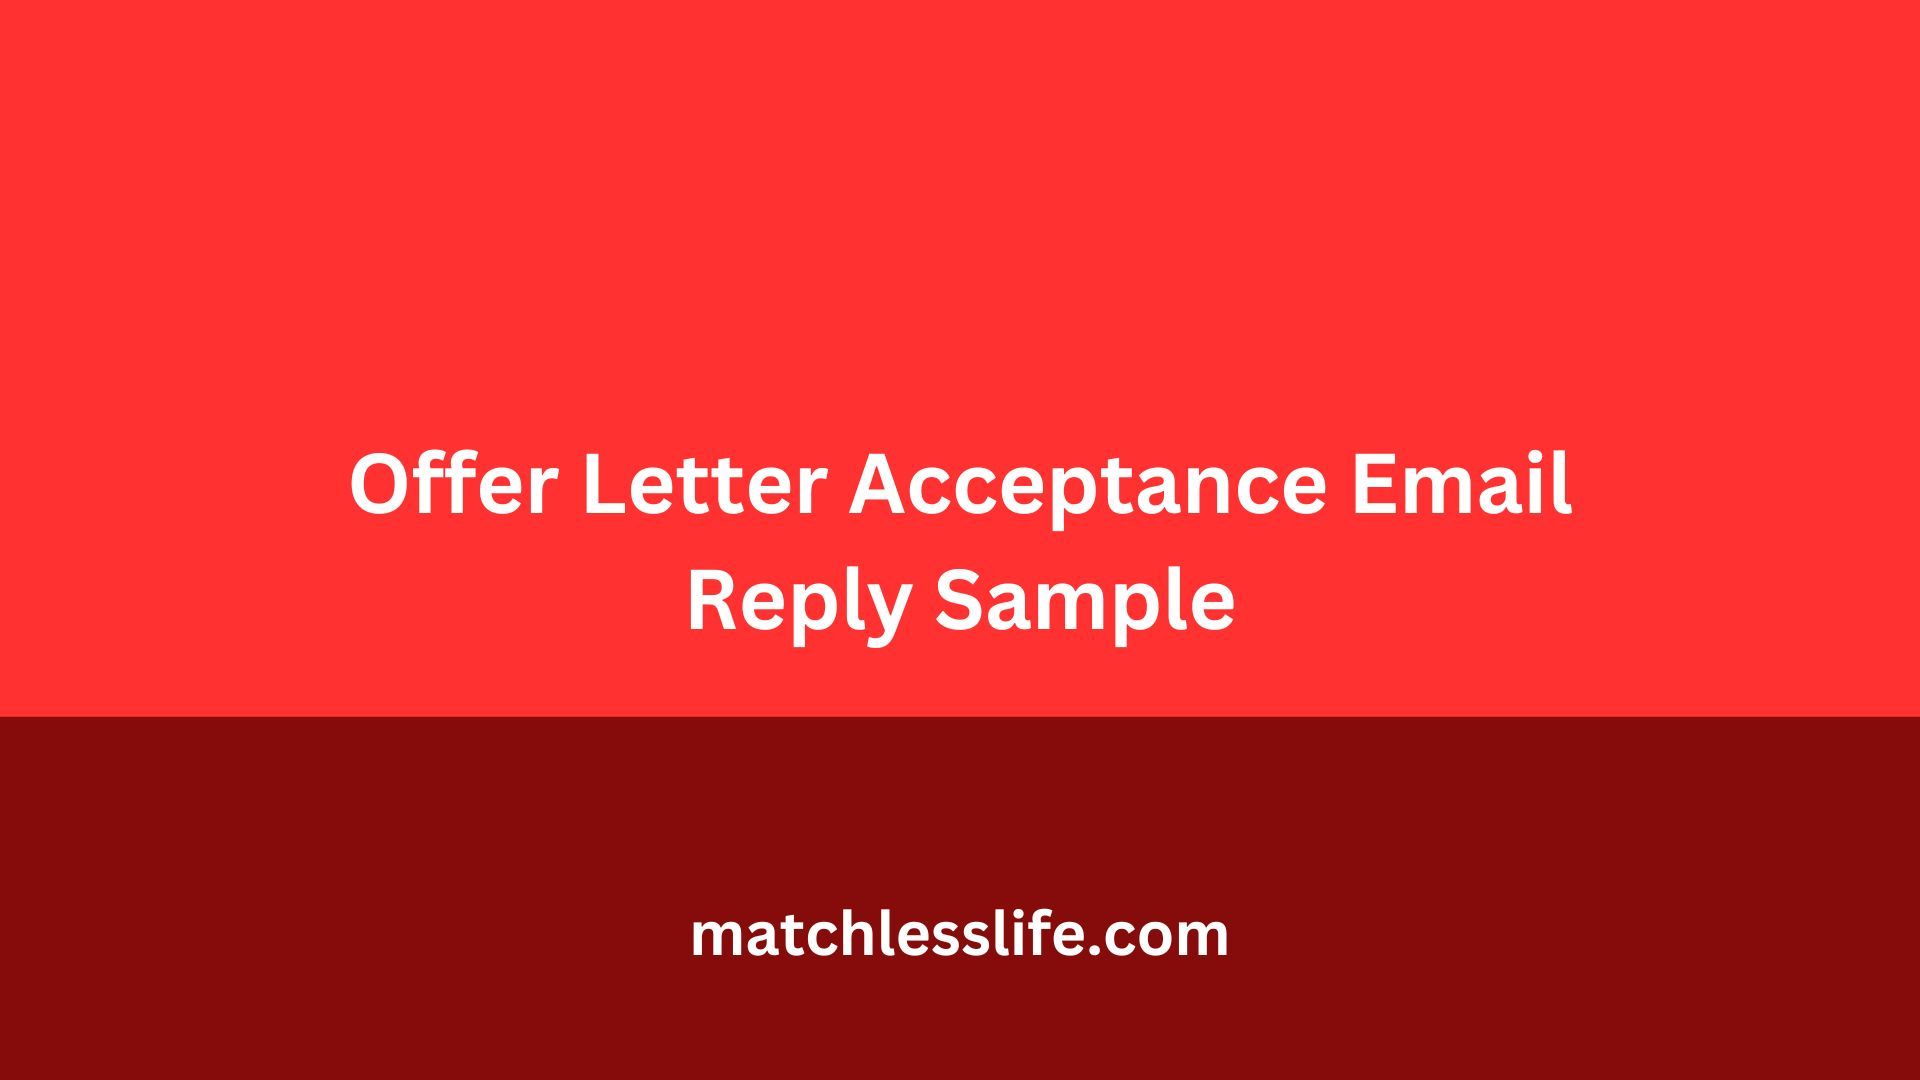 Offer Letter Acceptance Email Reply Sample